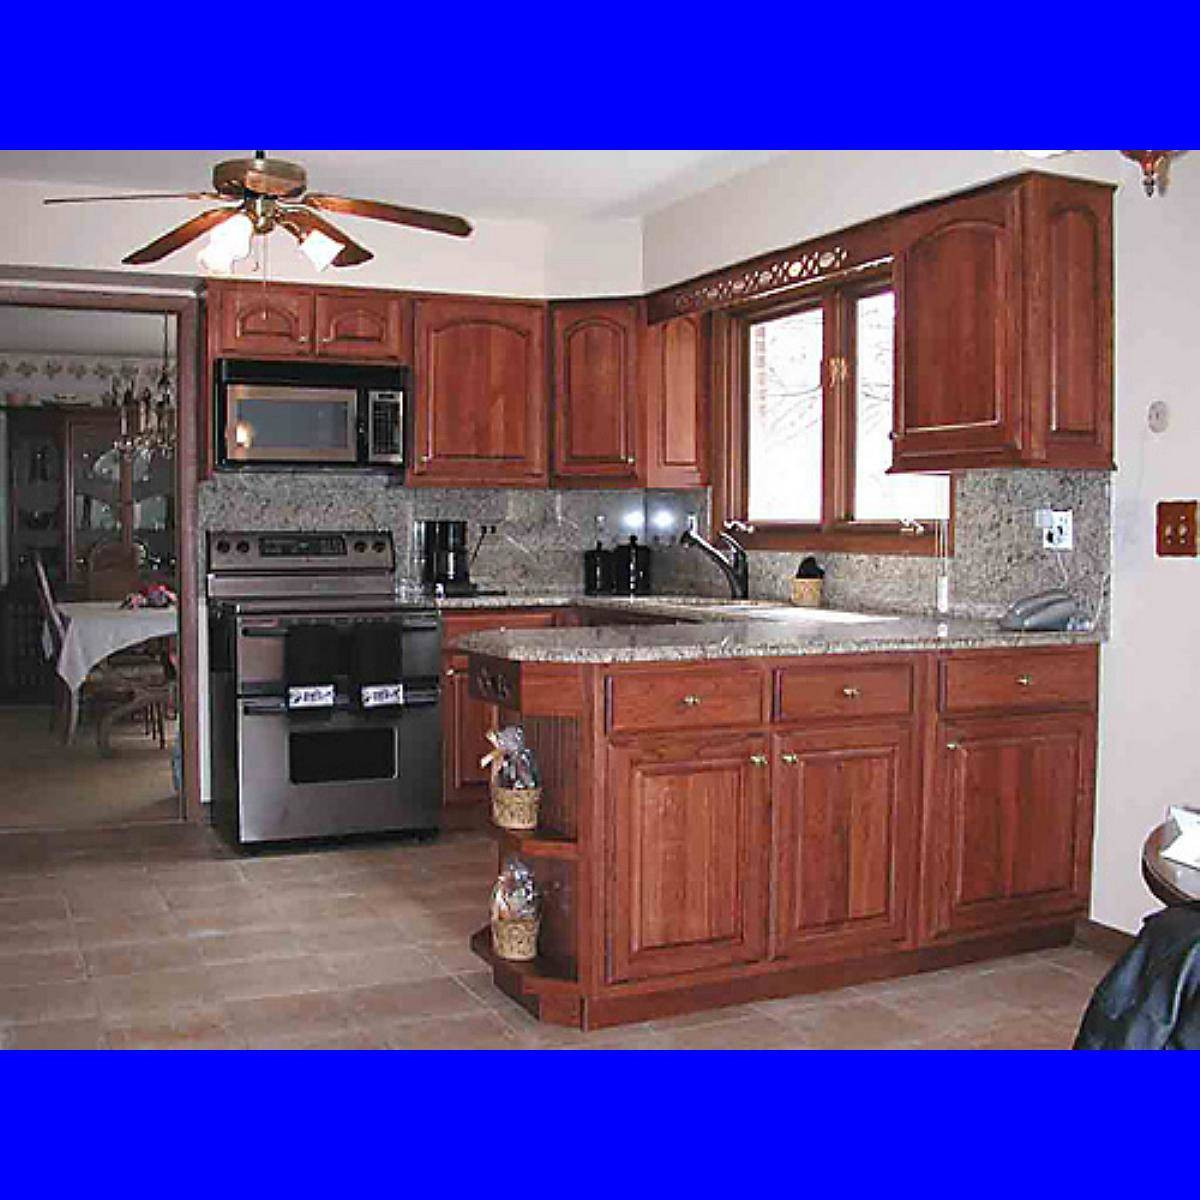 Small Kitchen Design Layout
 Small kitchen design layout ideas Video and s